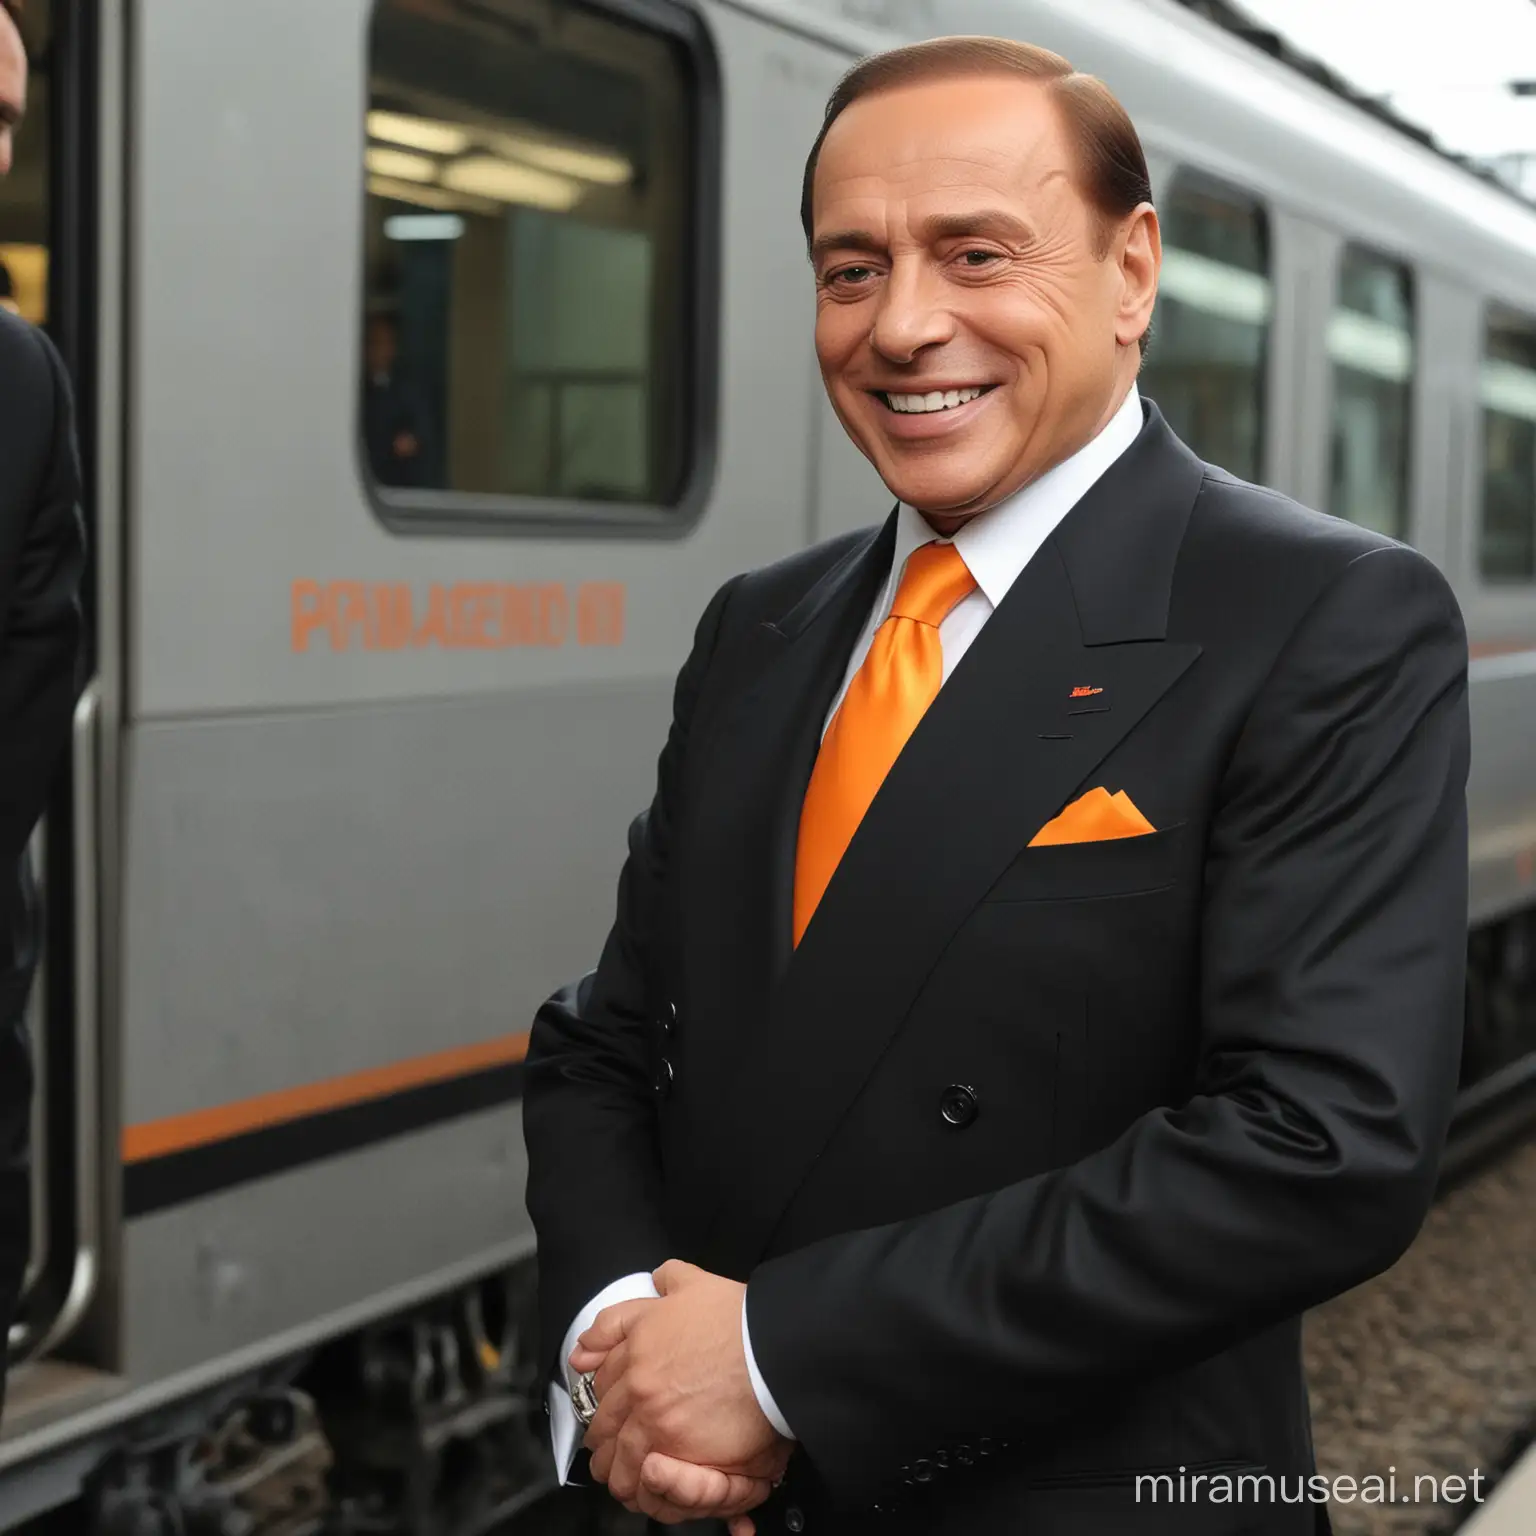 Handsome Berlusconi in Black Suit and Orange Tie at Train Station